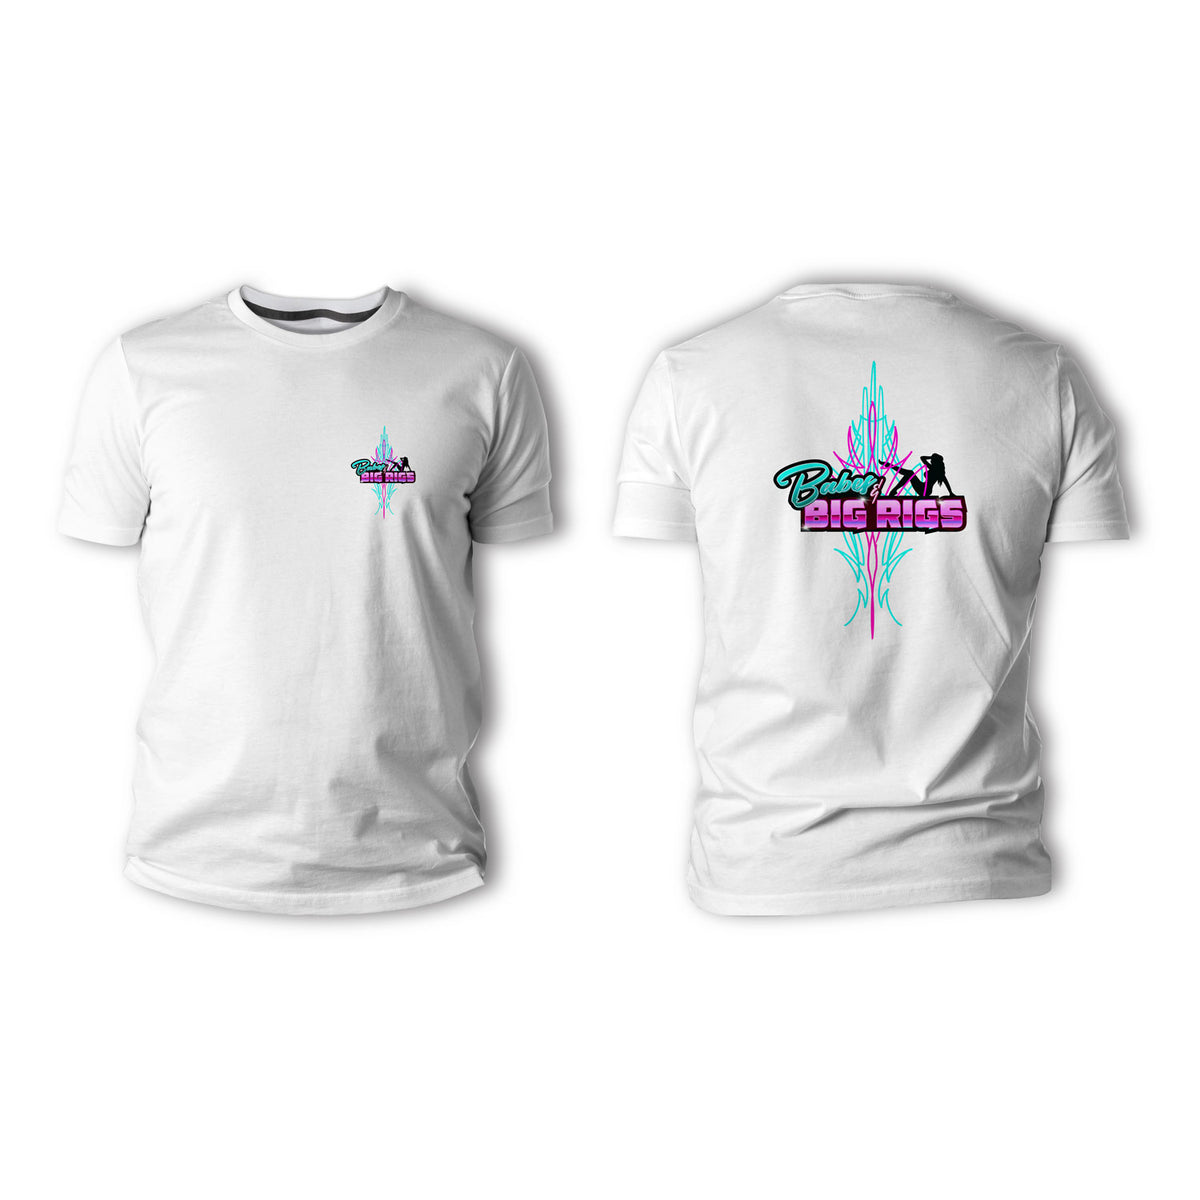 Teal and Pink Pinstripe Babes and Big Rigs Shirts and Hoodies